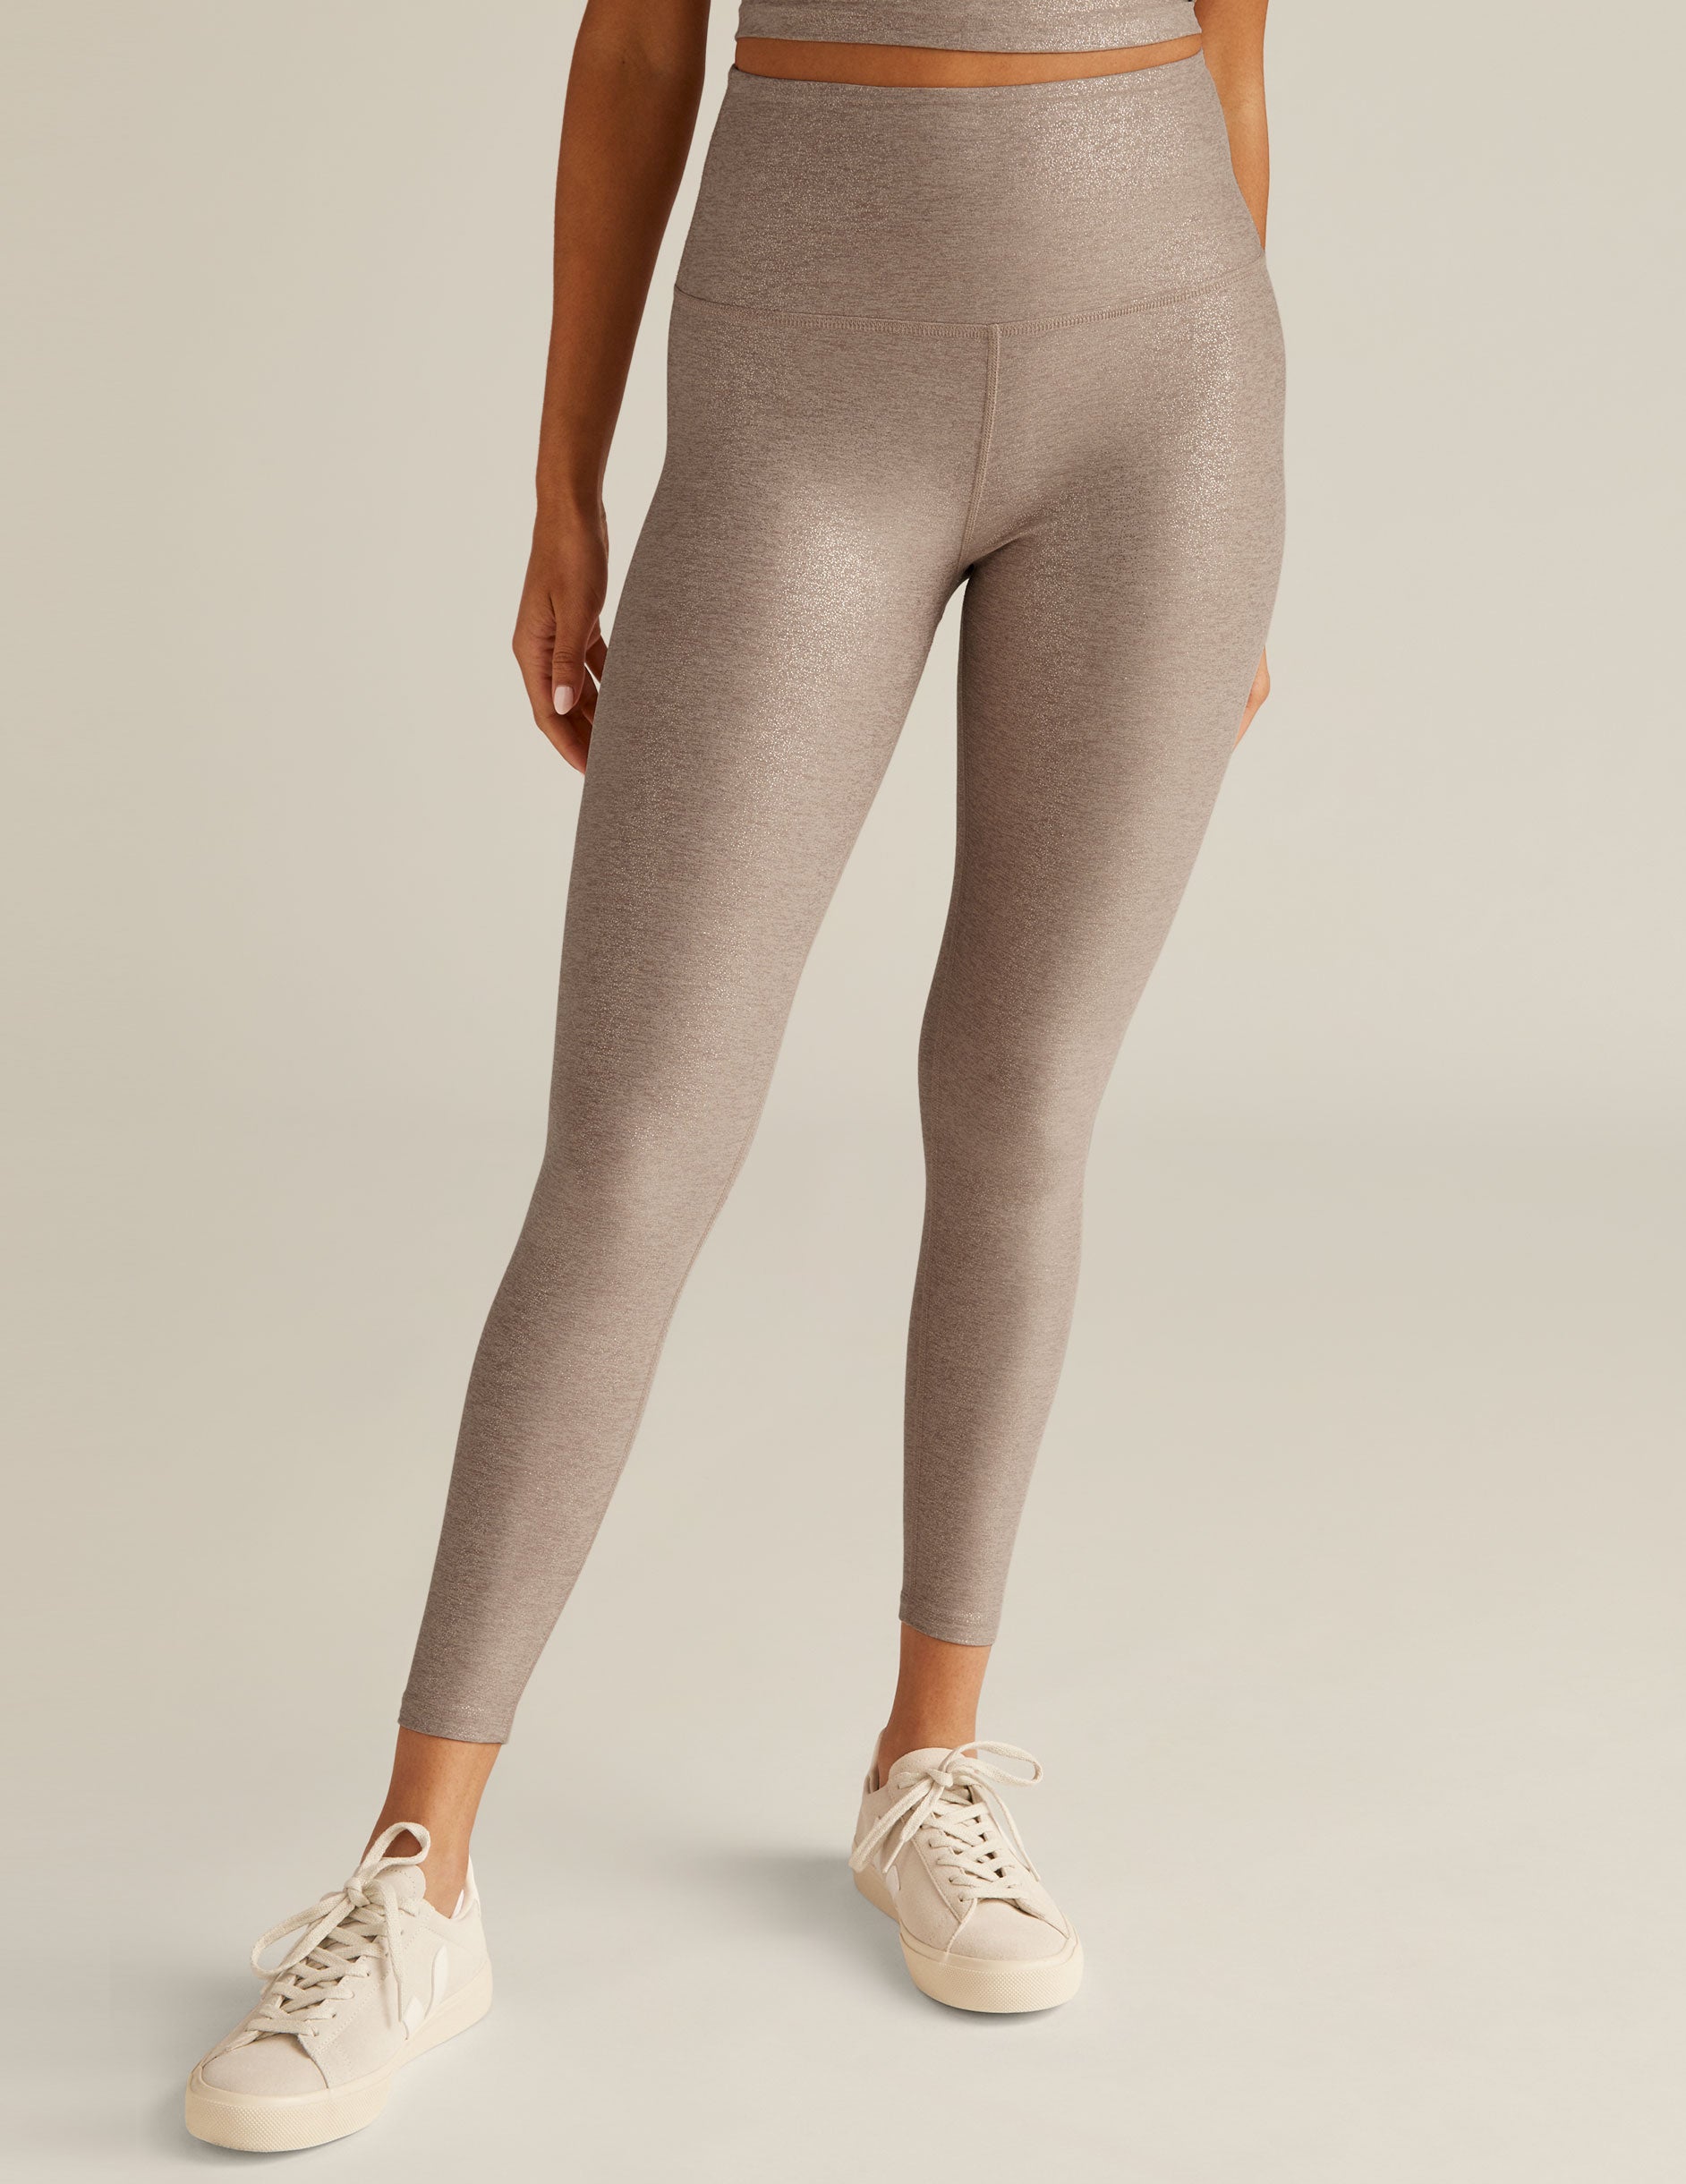 Beyond Yoga Softshine Sparkly High-Waisted Midi Legging  Urban Outfitters  Japan - Clothing, Music, Home & Accessories